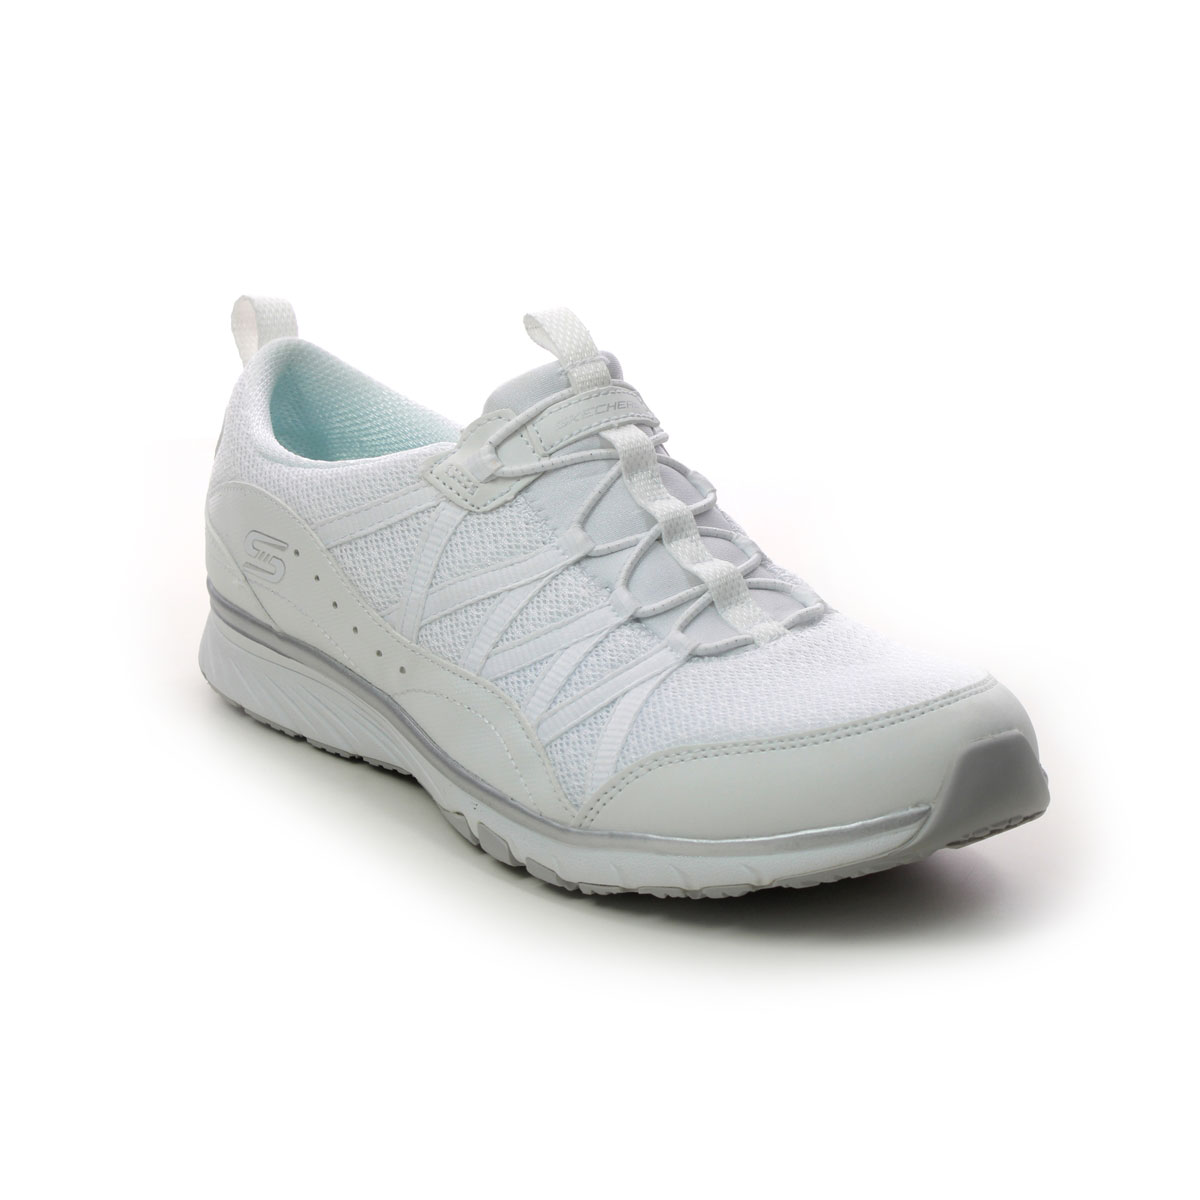 Skechers Gratis Sport White Silver Womens Trainers 104281 In Size 7 In Plain White Silver